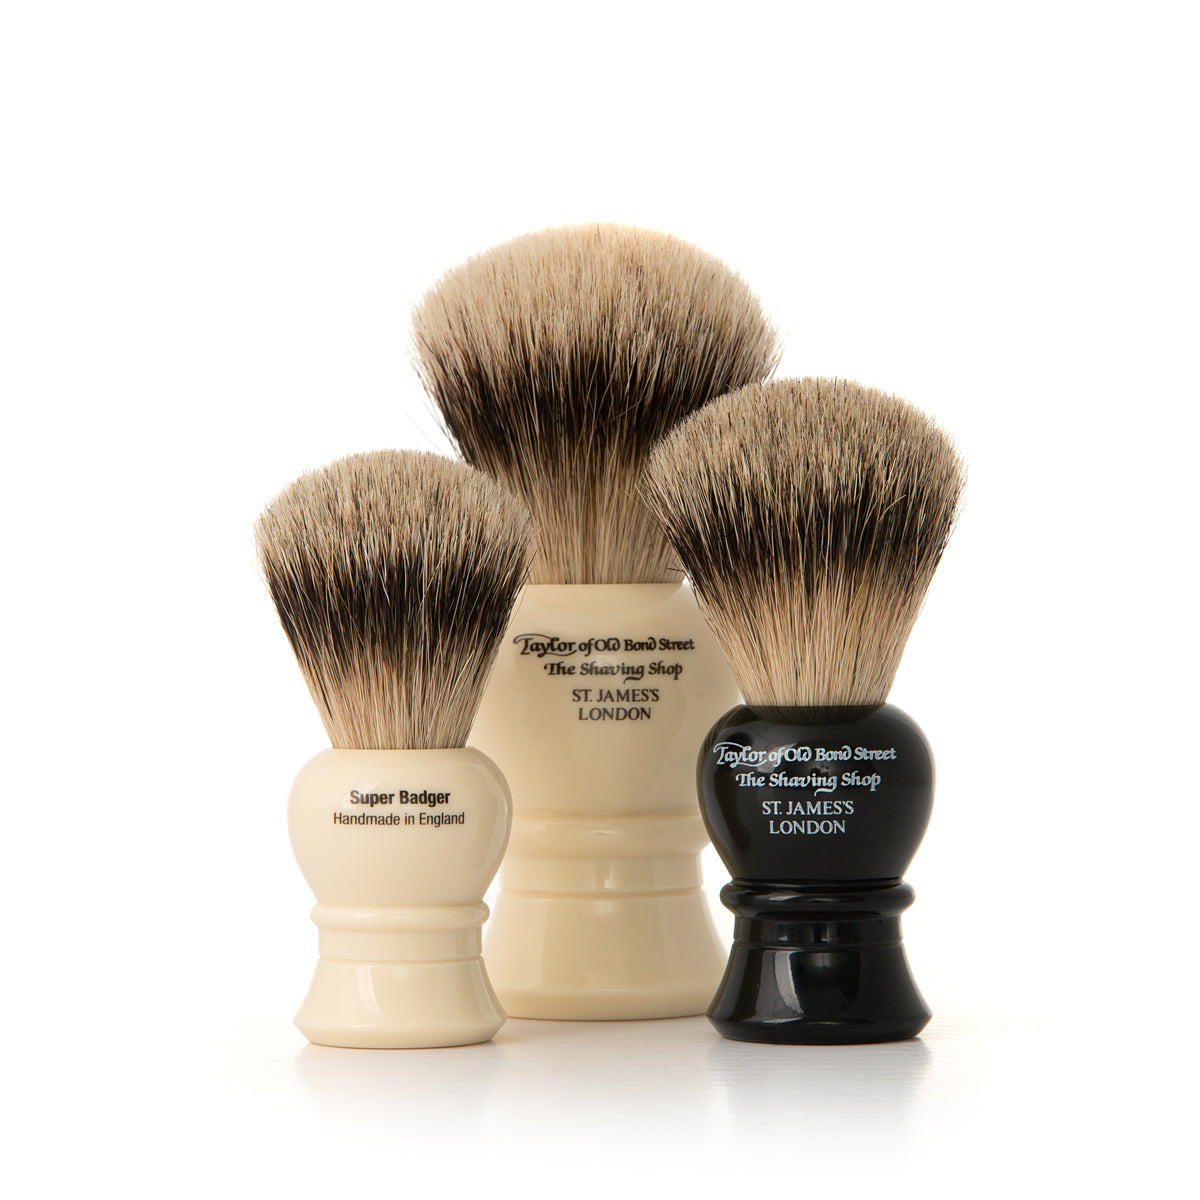 | 1854 Men Grooming Luxury Est. Old Taylor Bond for Street Products